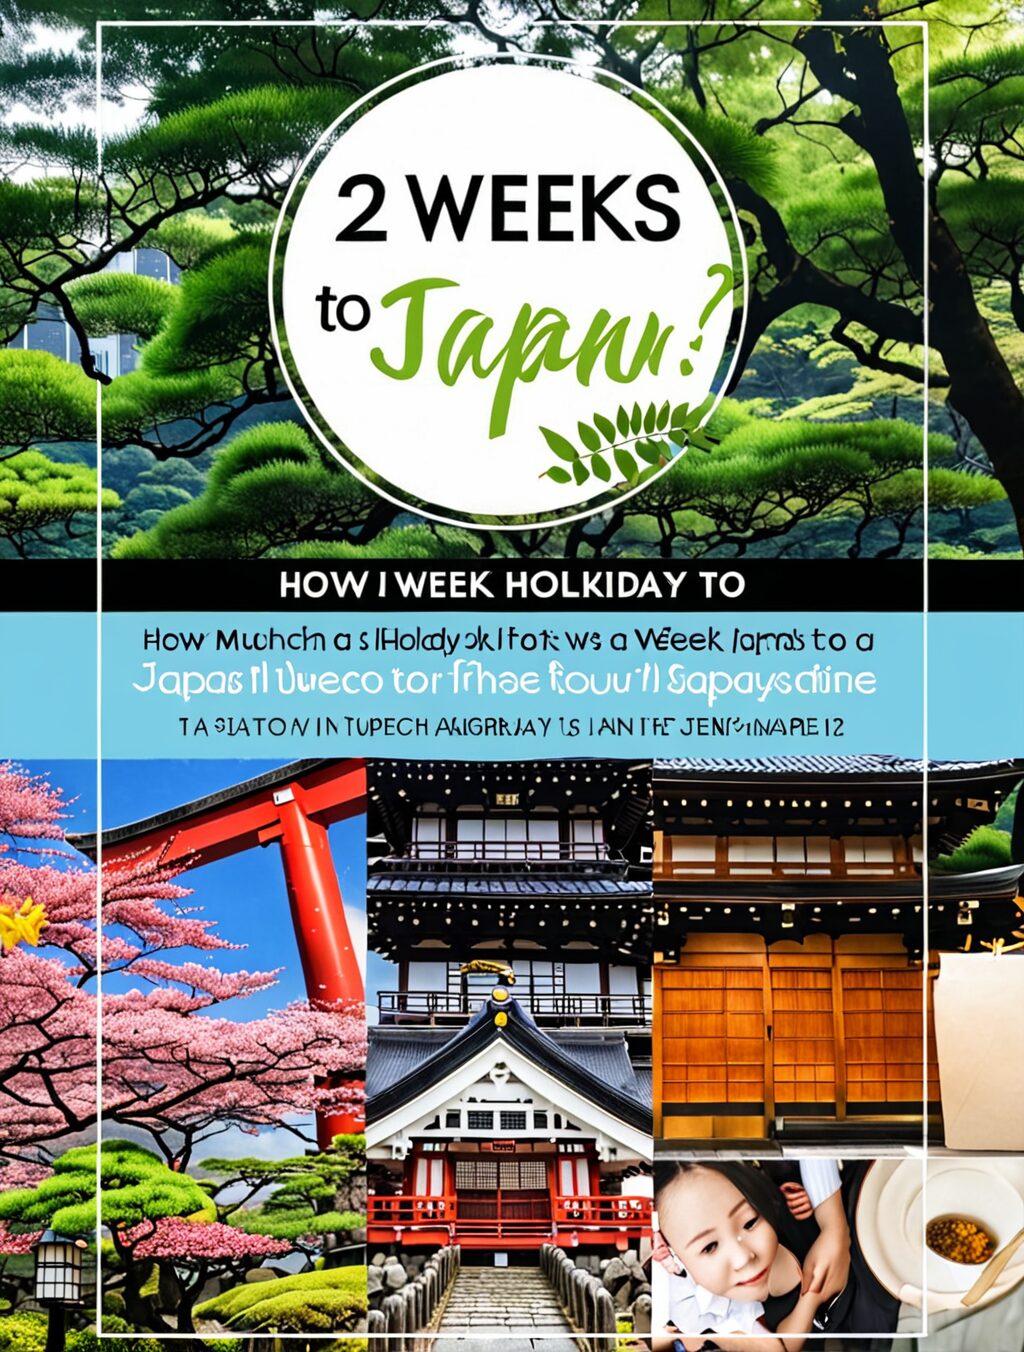 how much is a 2 week holiday to japan